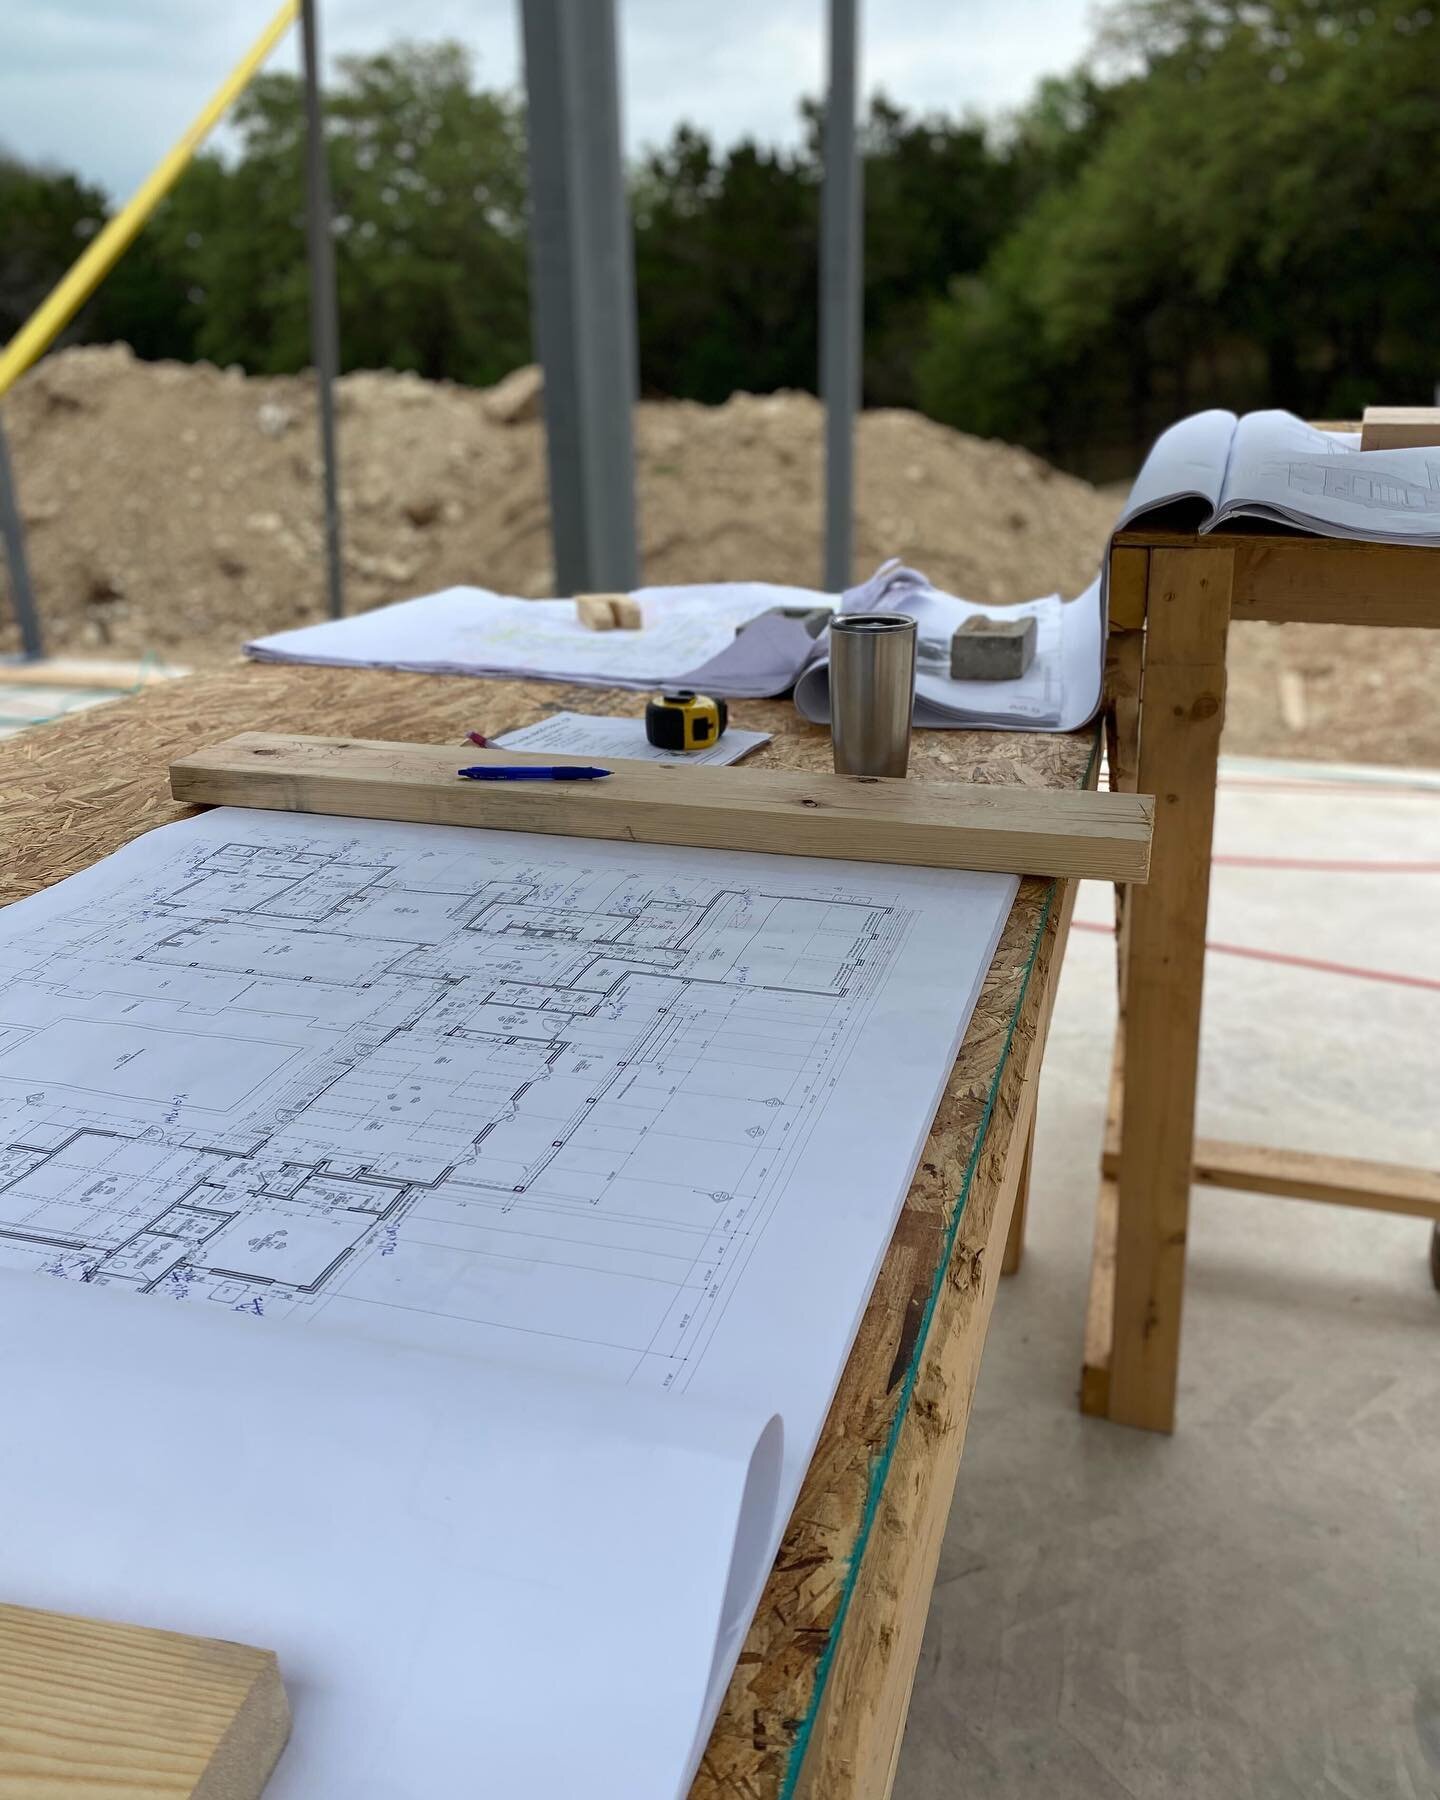 A little rain won&rsquo;t slow us down on our first day of framing!  Always a privilege to design with one of Austin&rsquo;s best architects.  #787designstudio #monrealframing #austinironworks